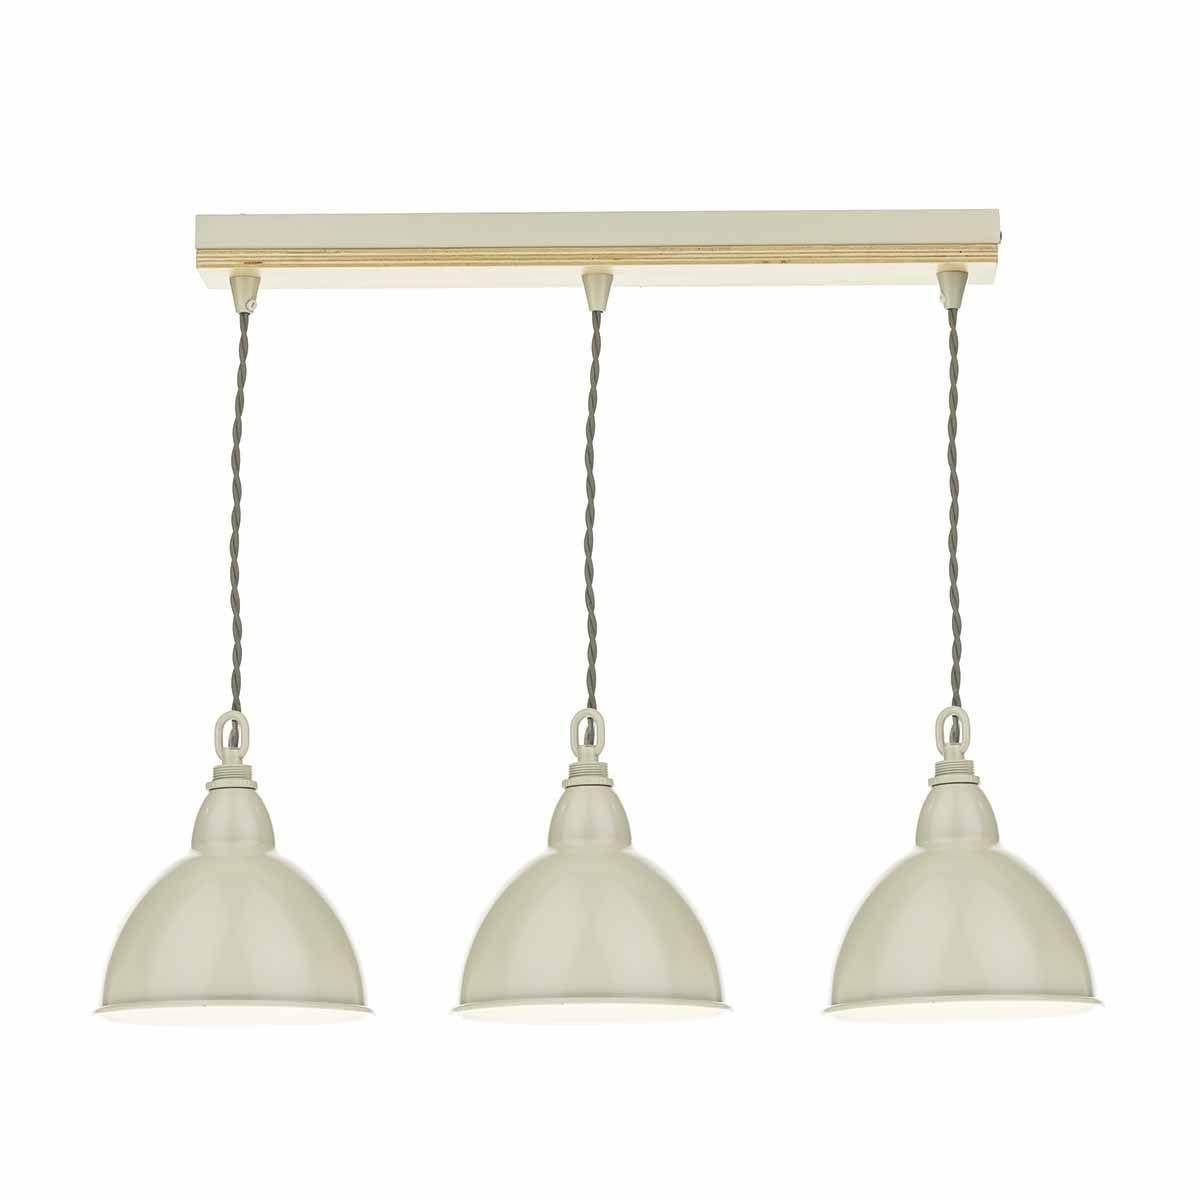 Dar Blyton 3 Light Bar Fitting complete with Painted Shds - Cusack Lighting